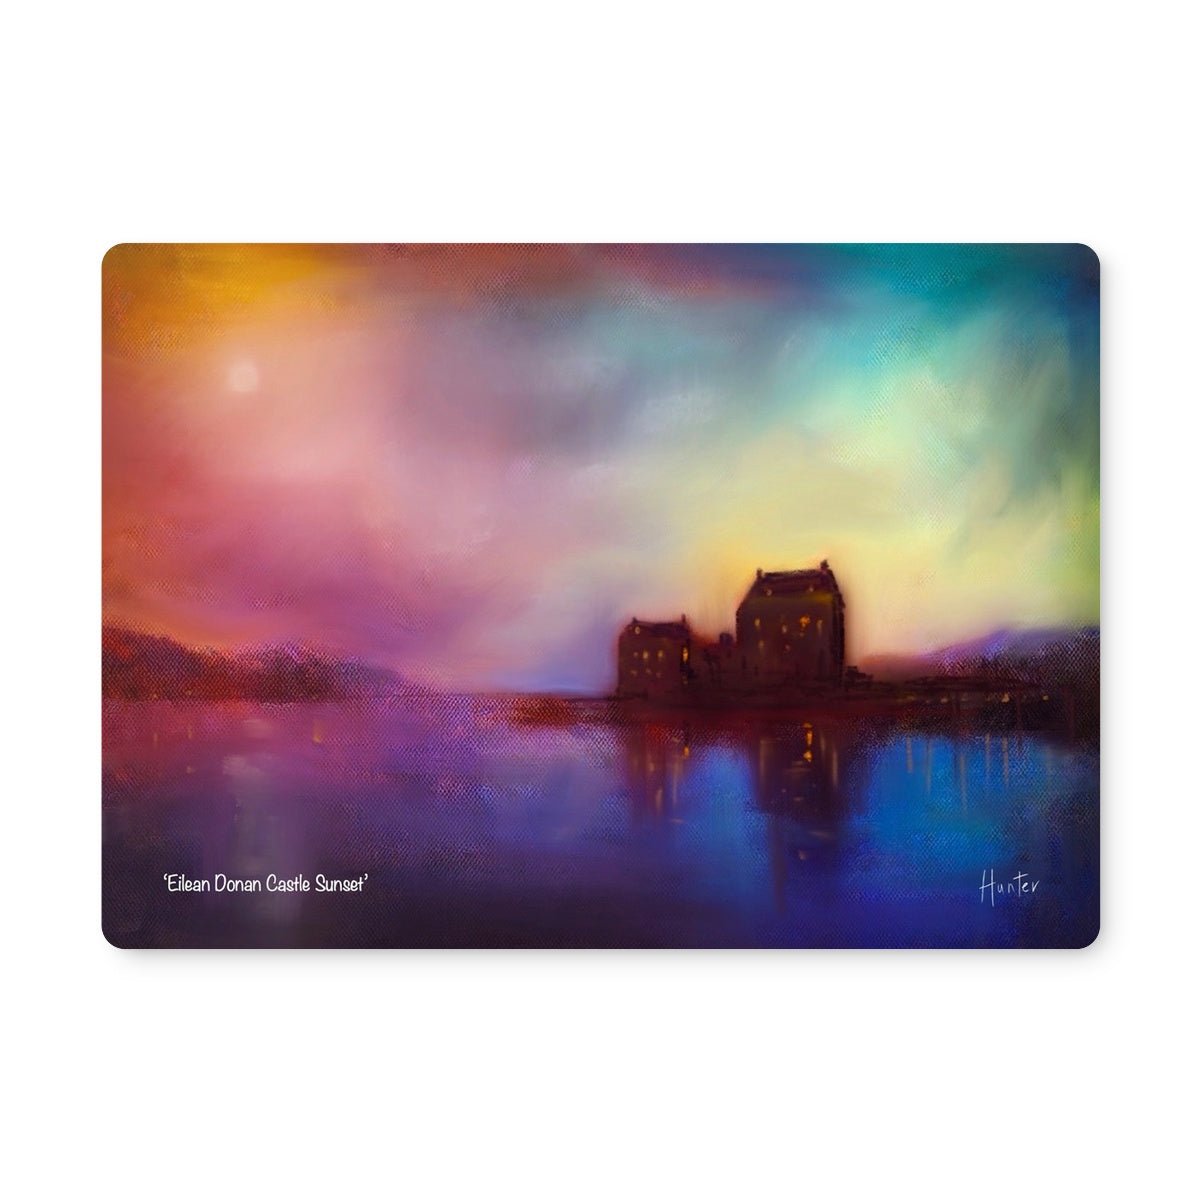 Eilean Donan Castle Sunset Art Gifts Placemat-Placemats-Scottish Castles Art Gallery-Single Placemat-Paintings, Prints, Homeware, Art Gifts From Scotland By Scottish Artist Kevin Hunter